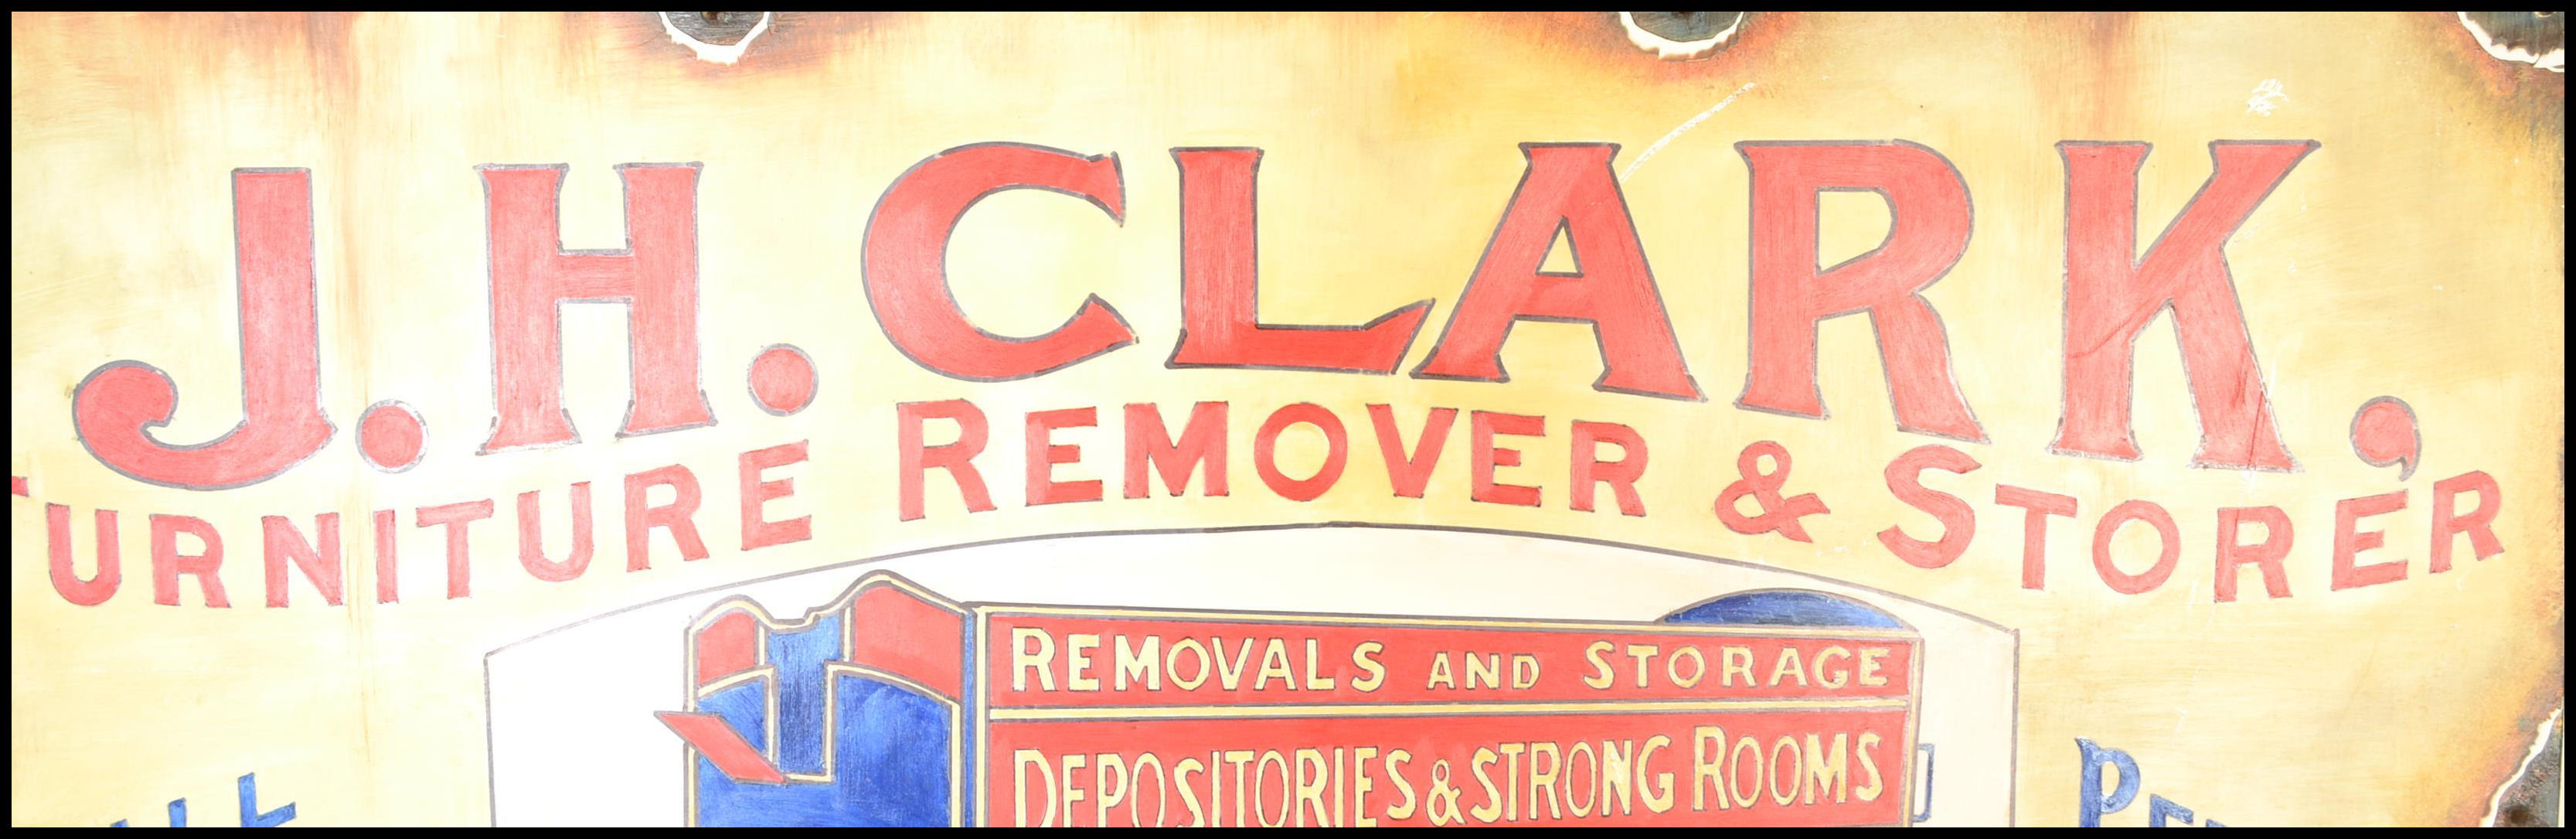 A contemporary artist's impression of a vintage enamel advertising sign for J. H. Clark furniture - Image 3 of 3